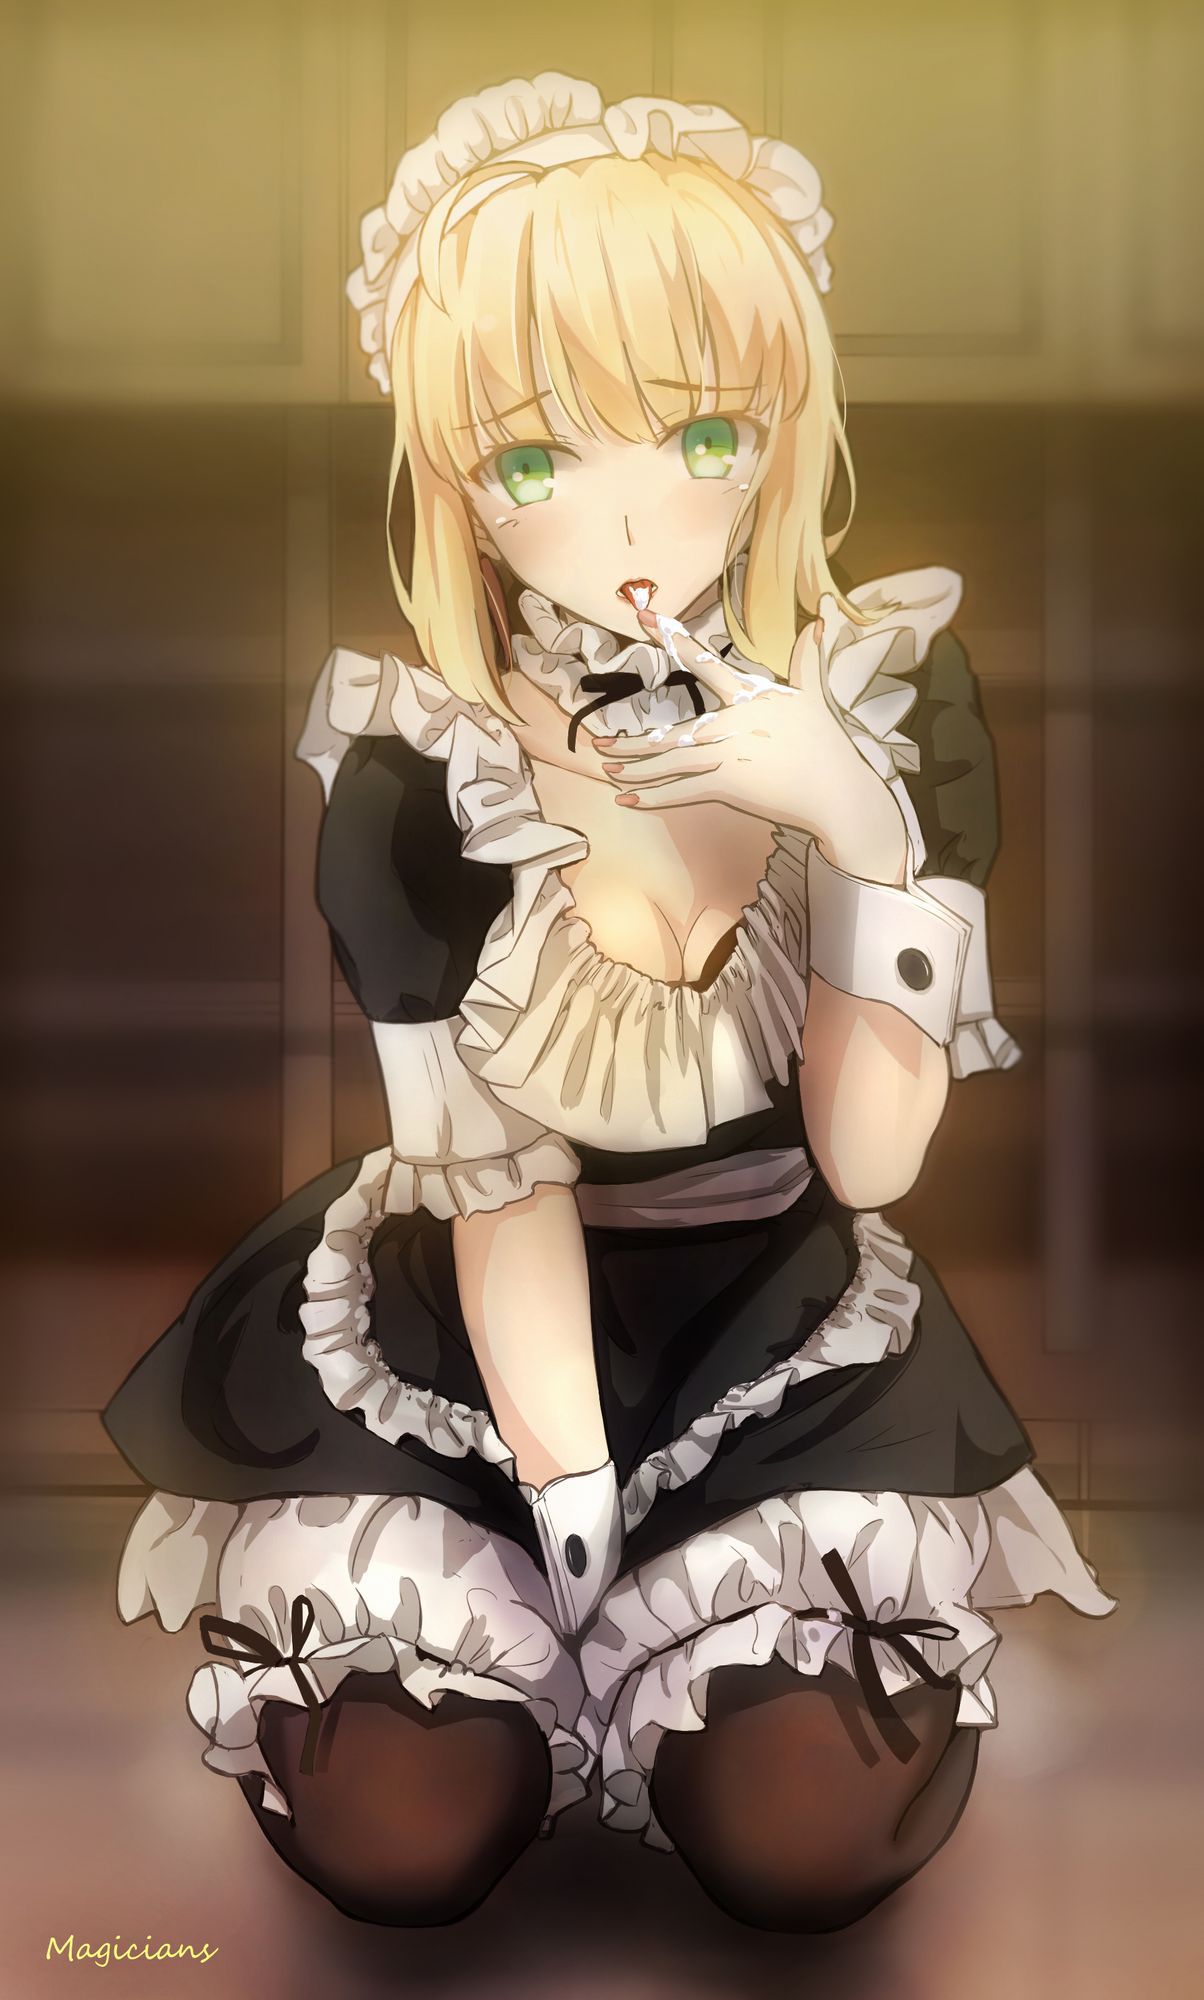 Take a picture of the lovely maid, (secondary / ZIP) instinctively want to hit will be 14